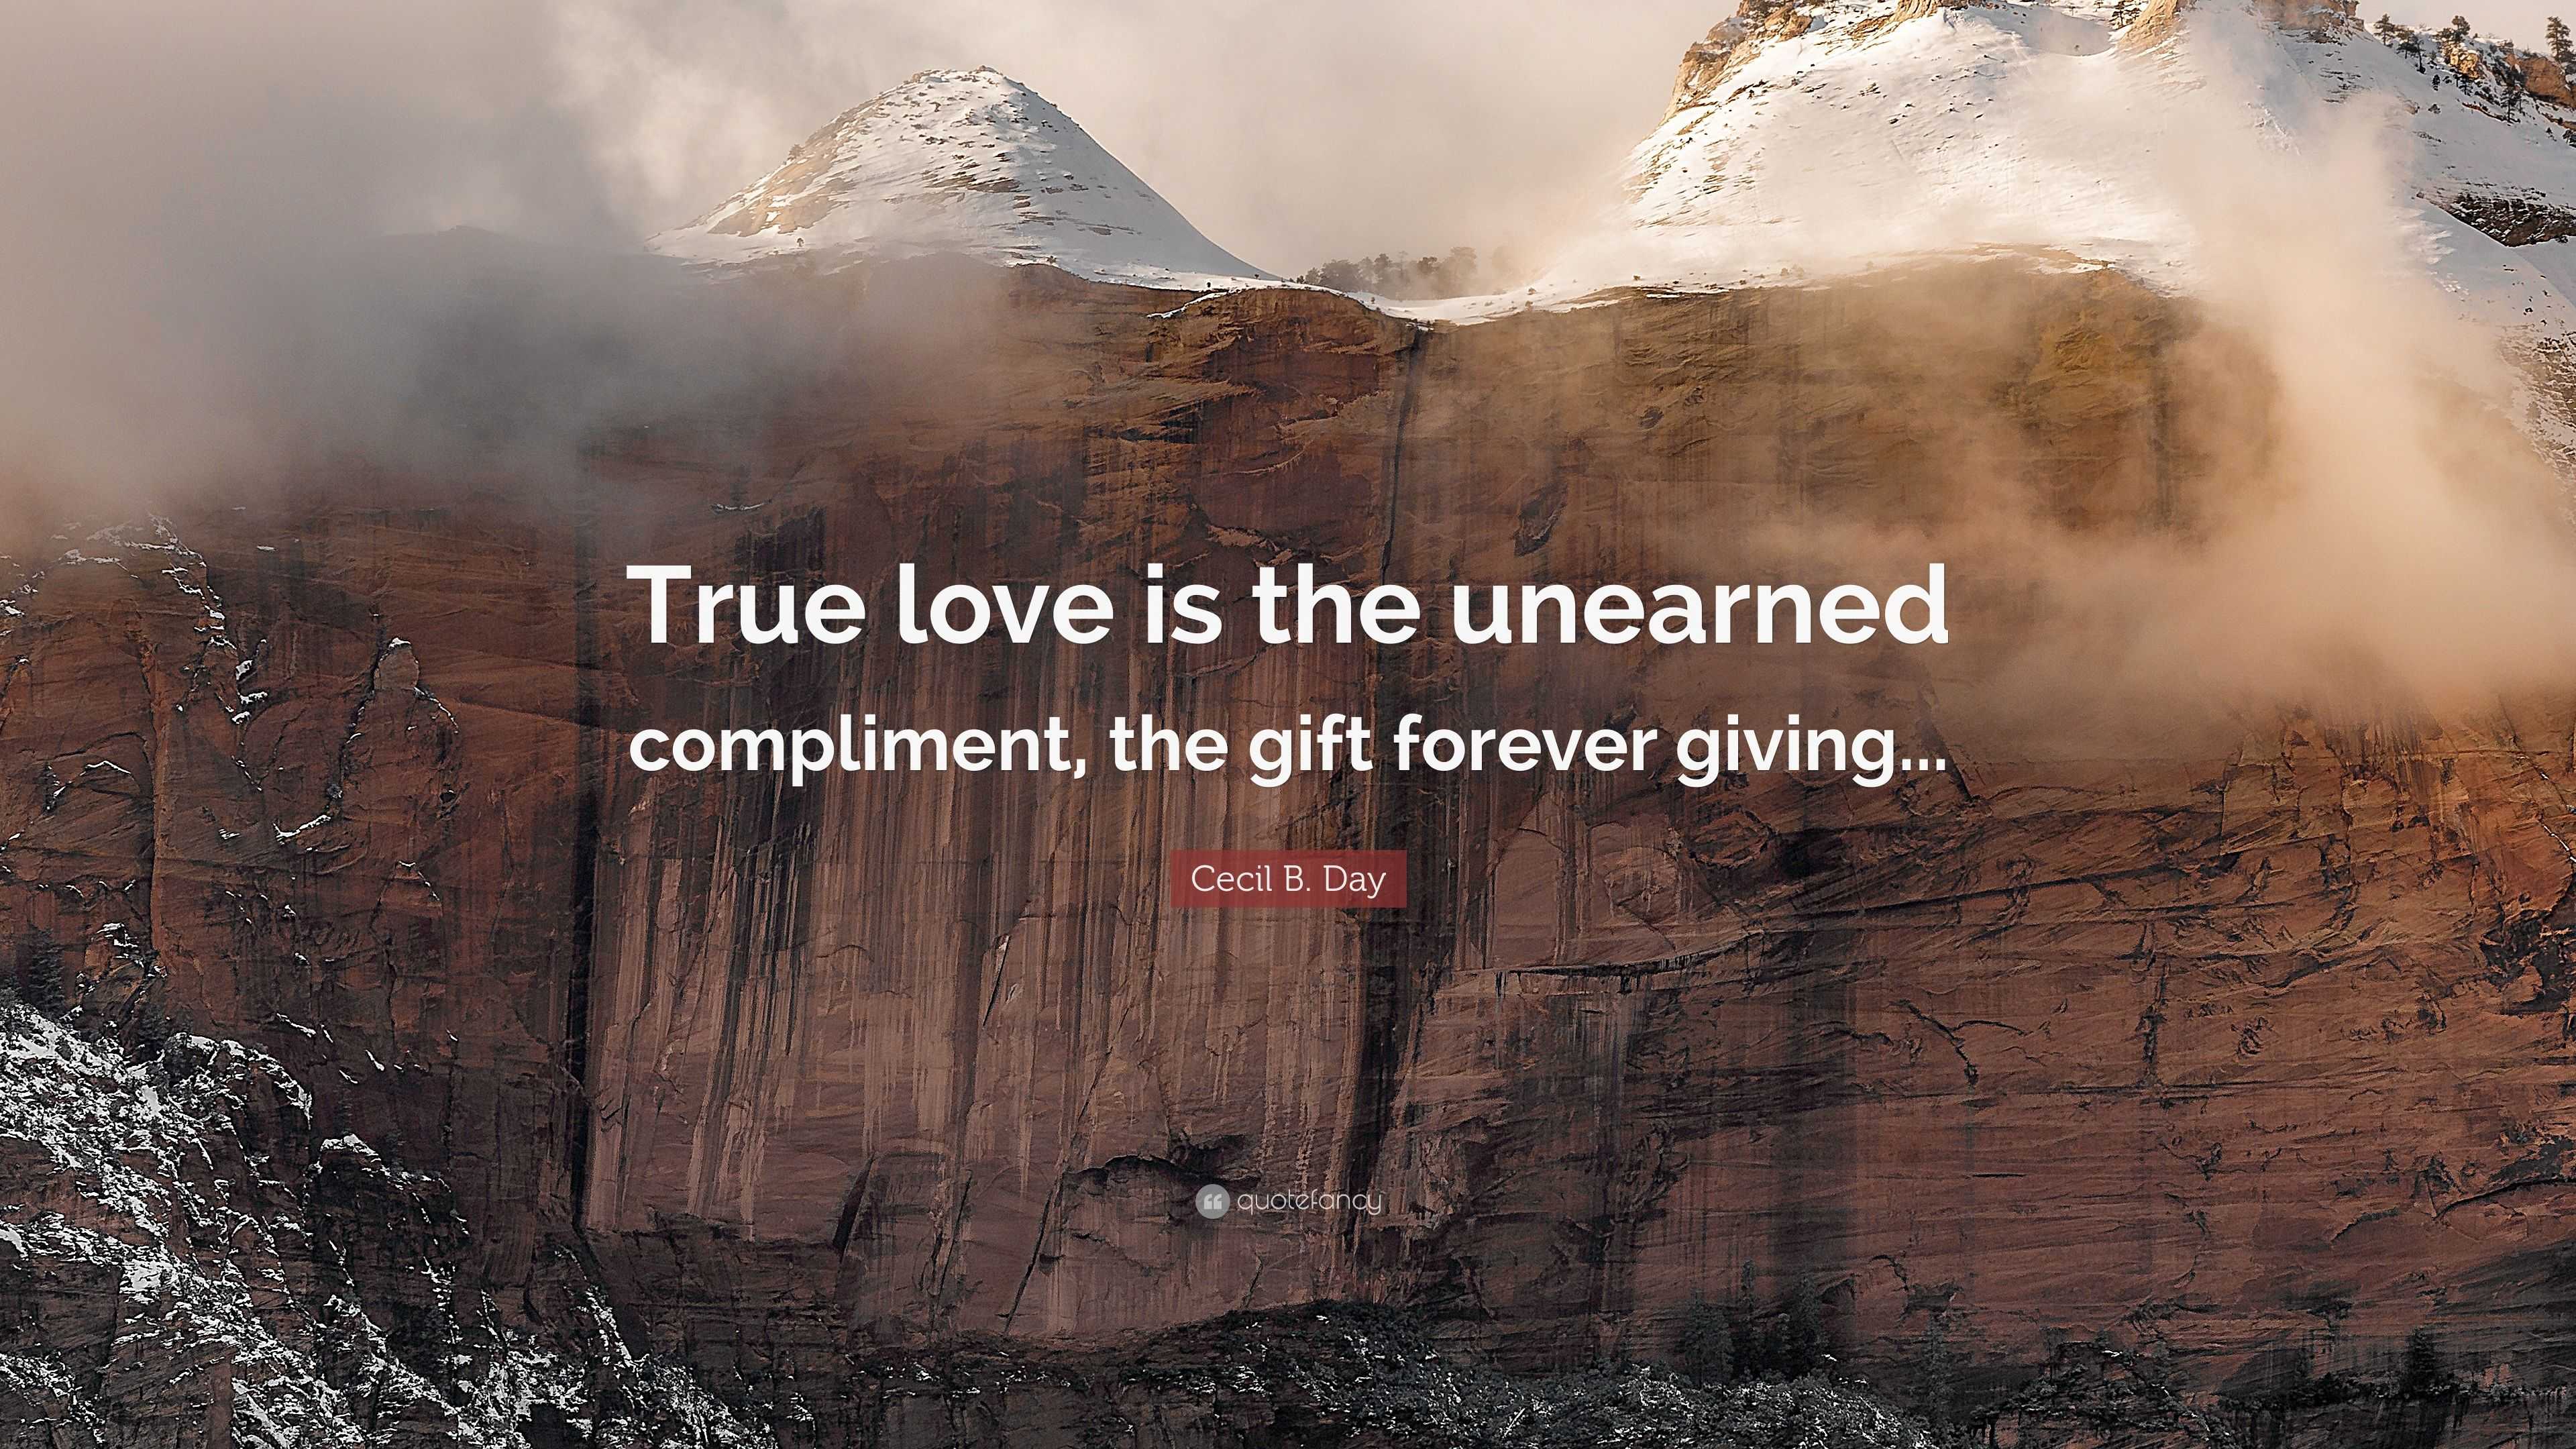 Cecil B Day Quote “True love is the unearned pliment the t